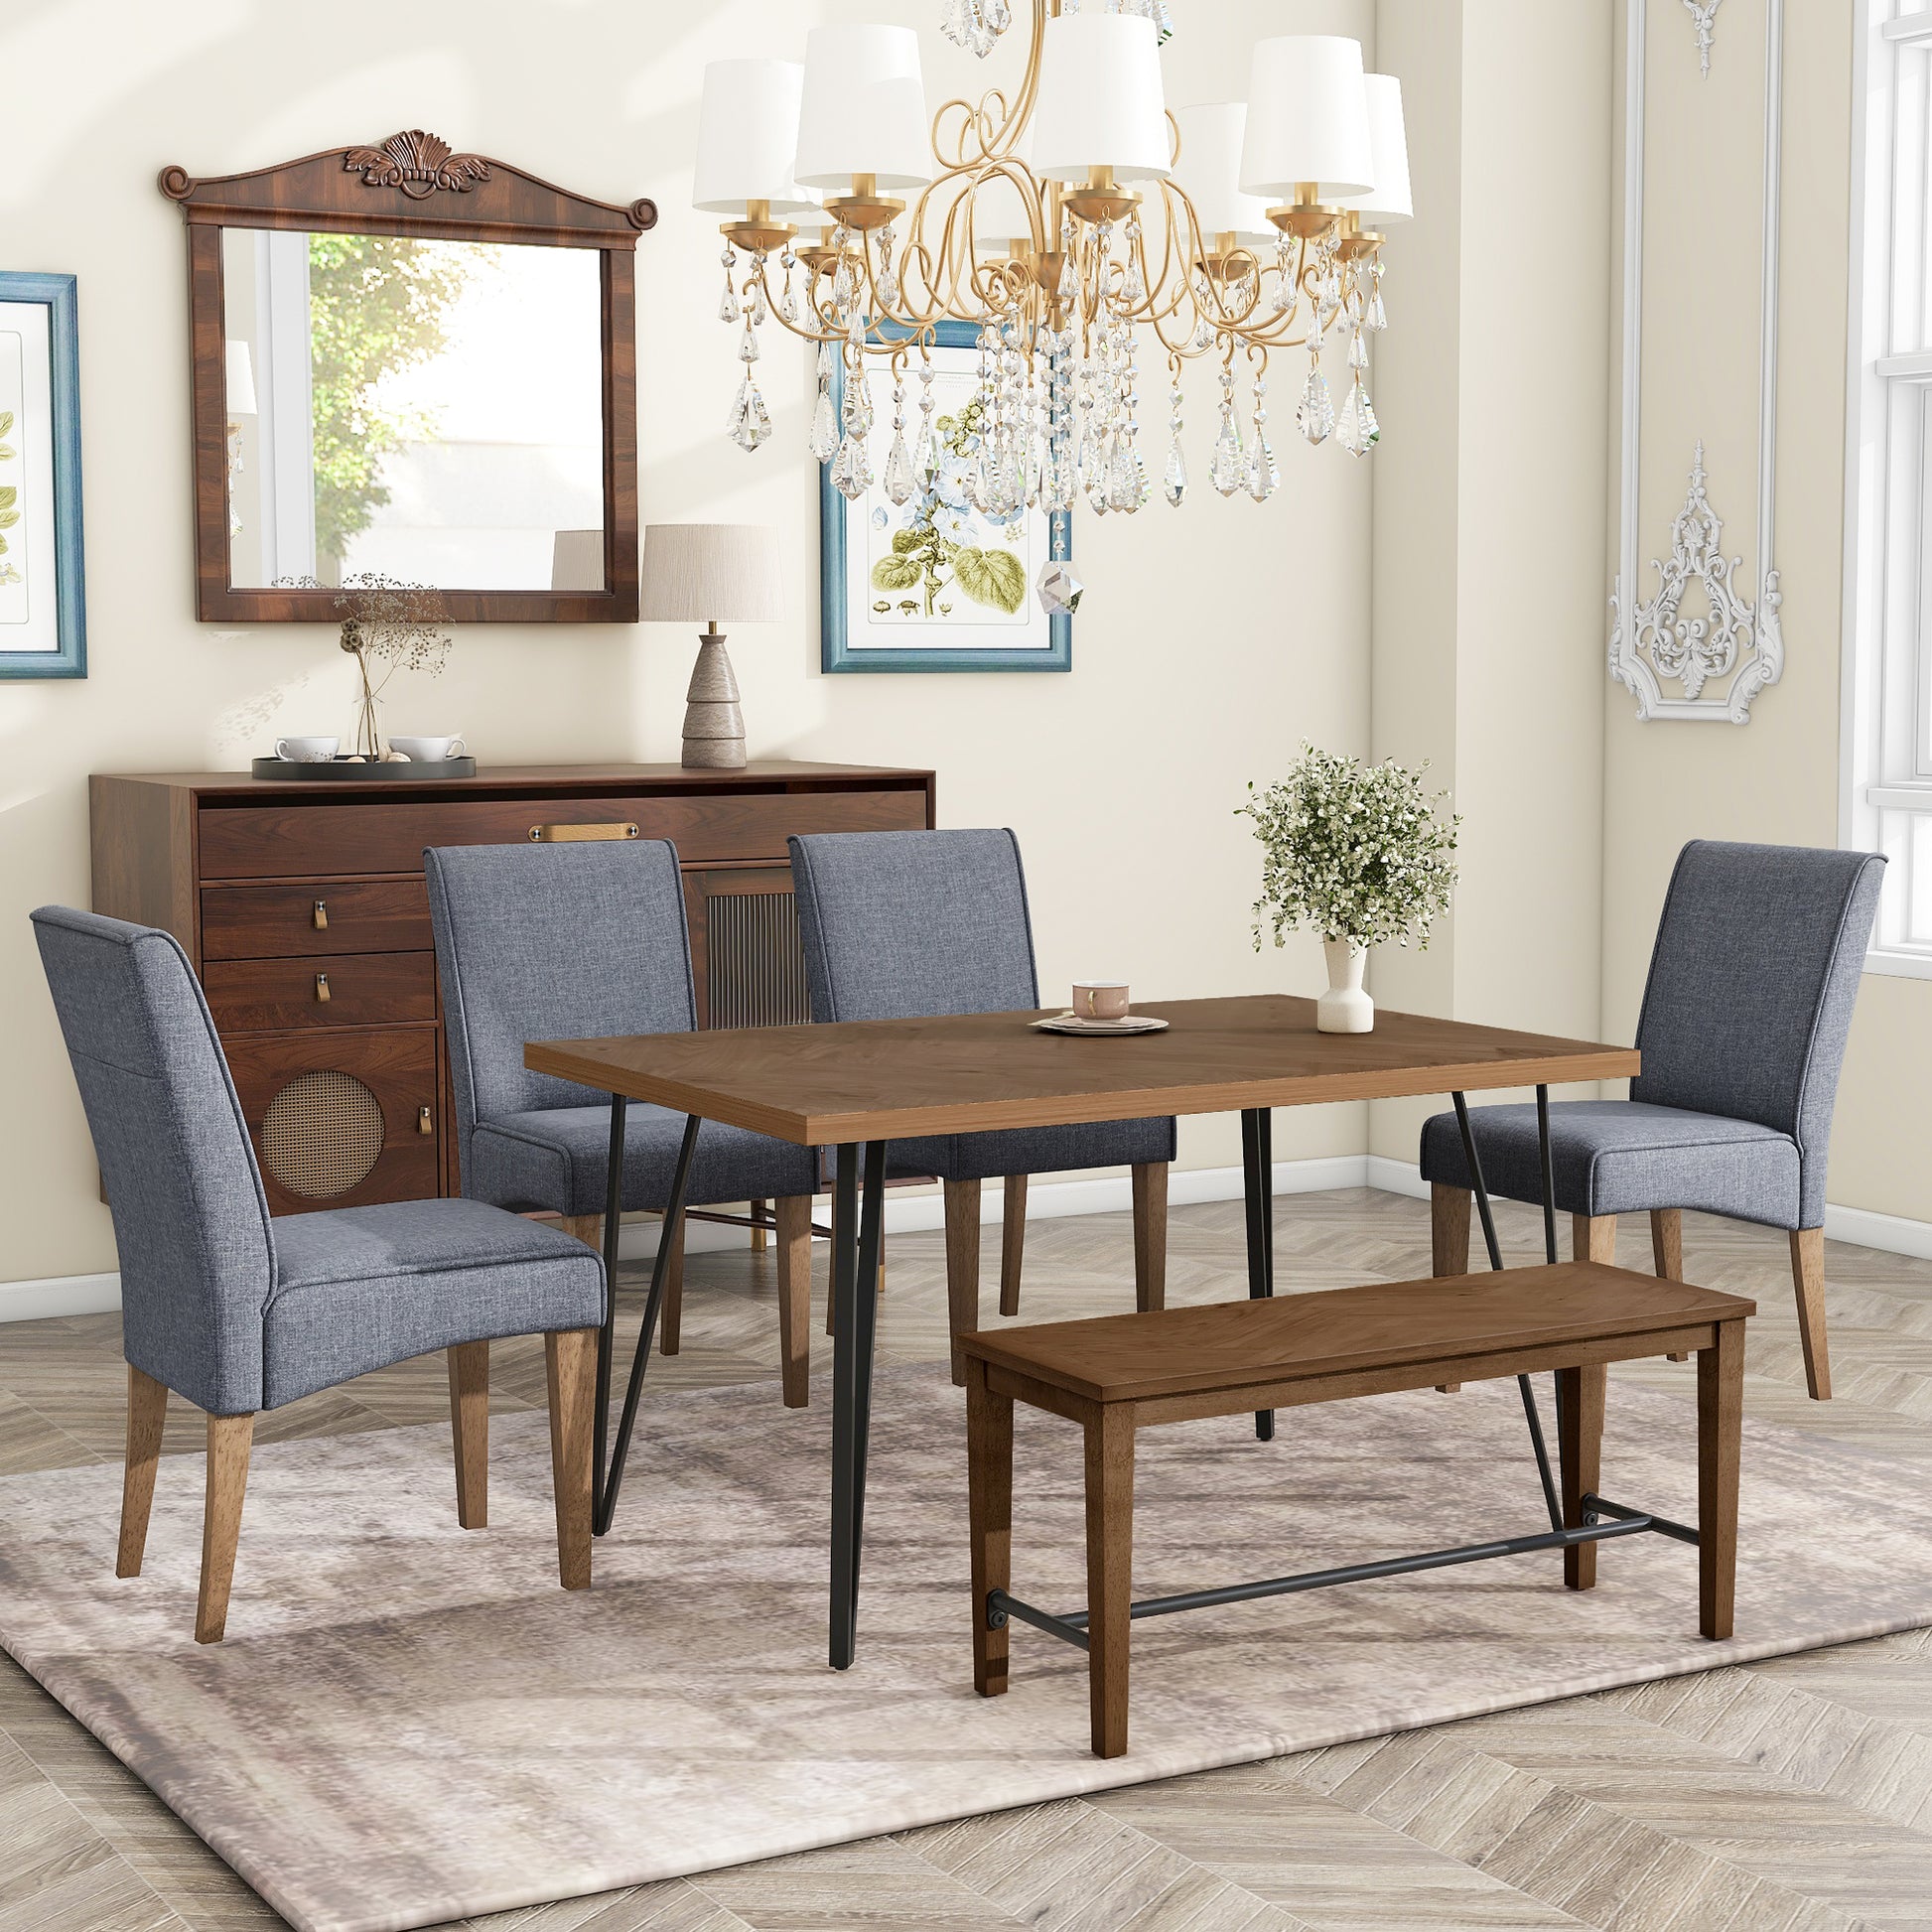 TOPMAX Modern 6-Piece Dining Table Set with V-Shape Metal Legs, Wood Kitchen Table Set with 4 Upholstered Chairs and Bench for 6,Brown - Enova Luxe Home Store